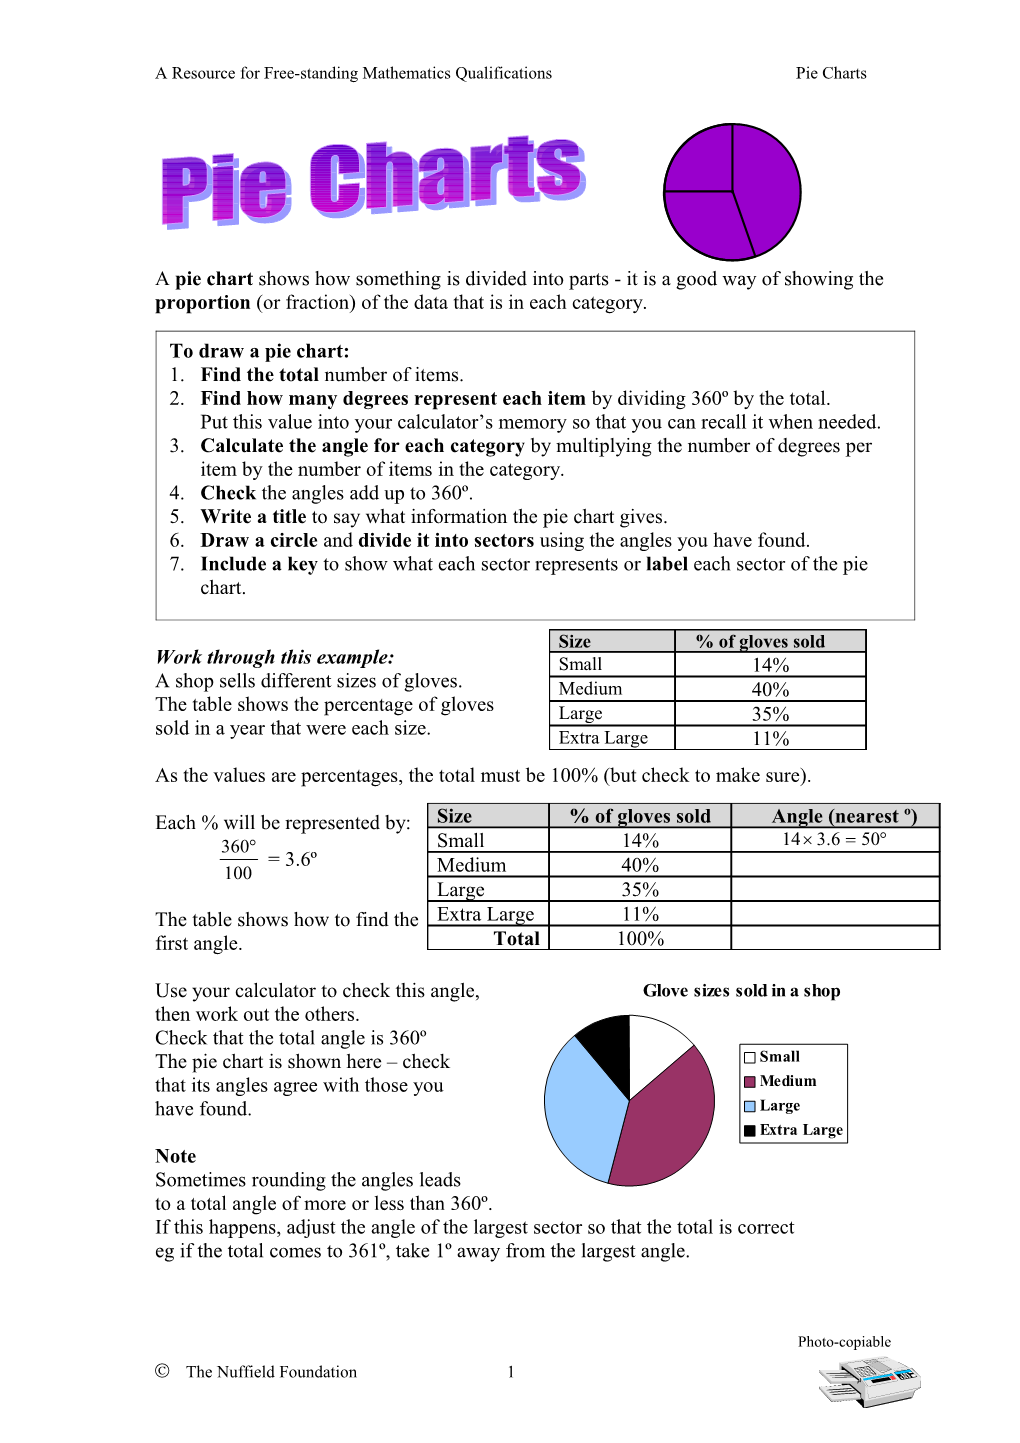 A Resource for Free-Standing Mathematics Qualifications Pie Charts